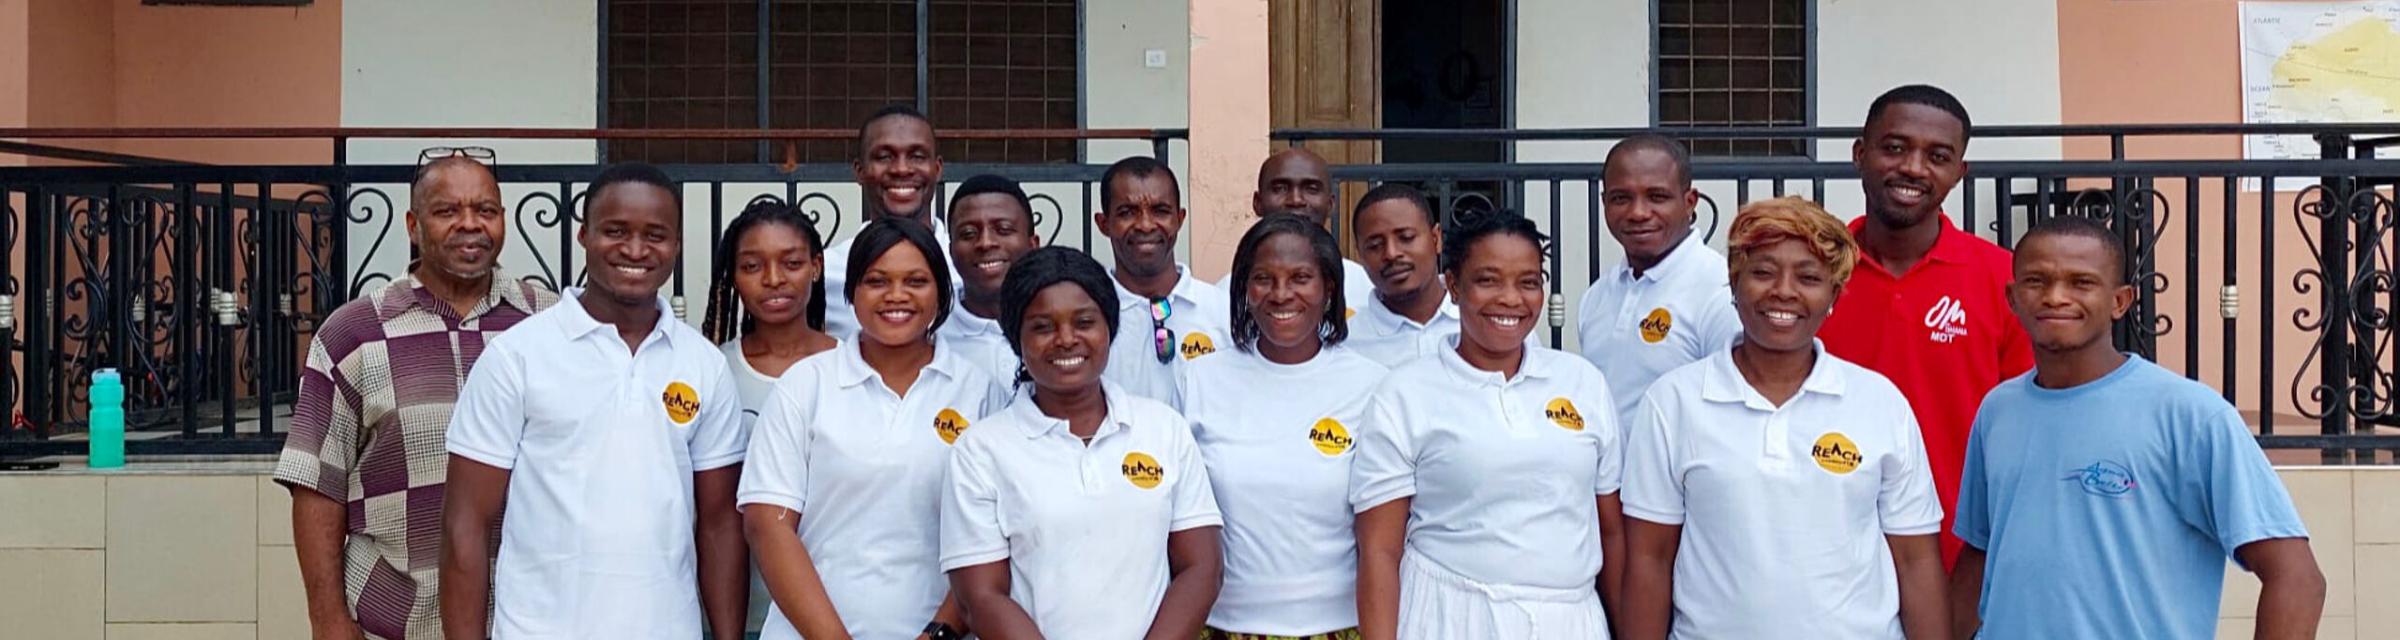 REACH leaders with 2022 participants at the REACH base in Ghana.